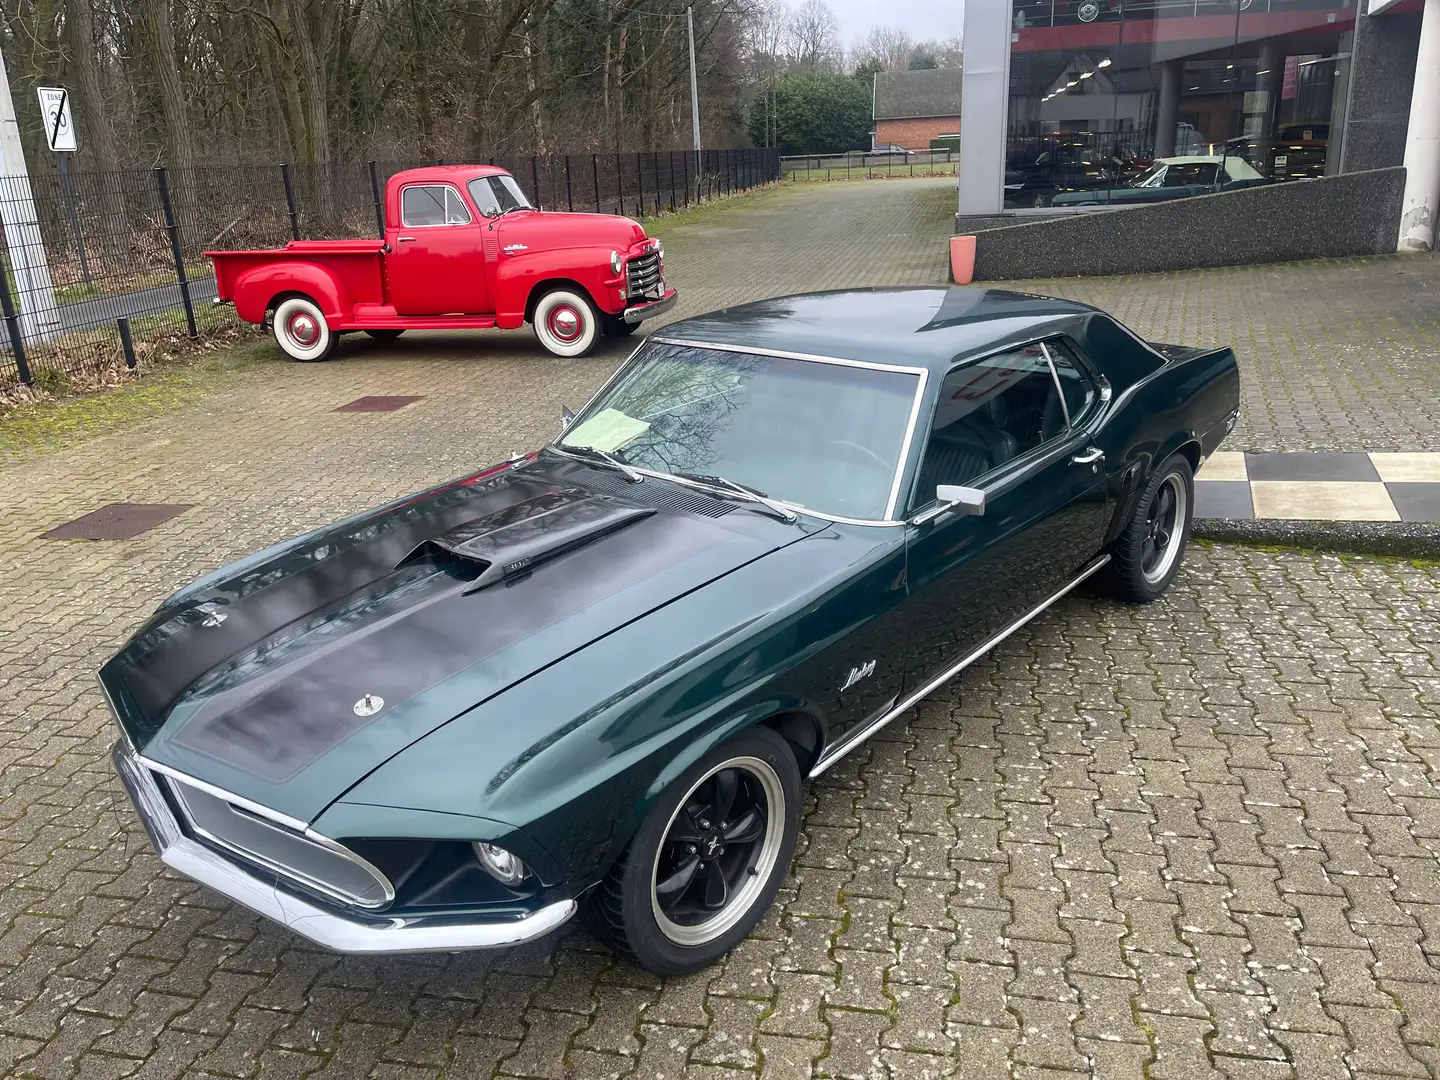 Ford Mustang Mustang Coupe 1969 "OPENHOUSE 25&26 May" Grün - 1